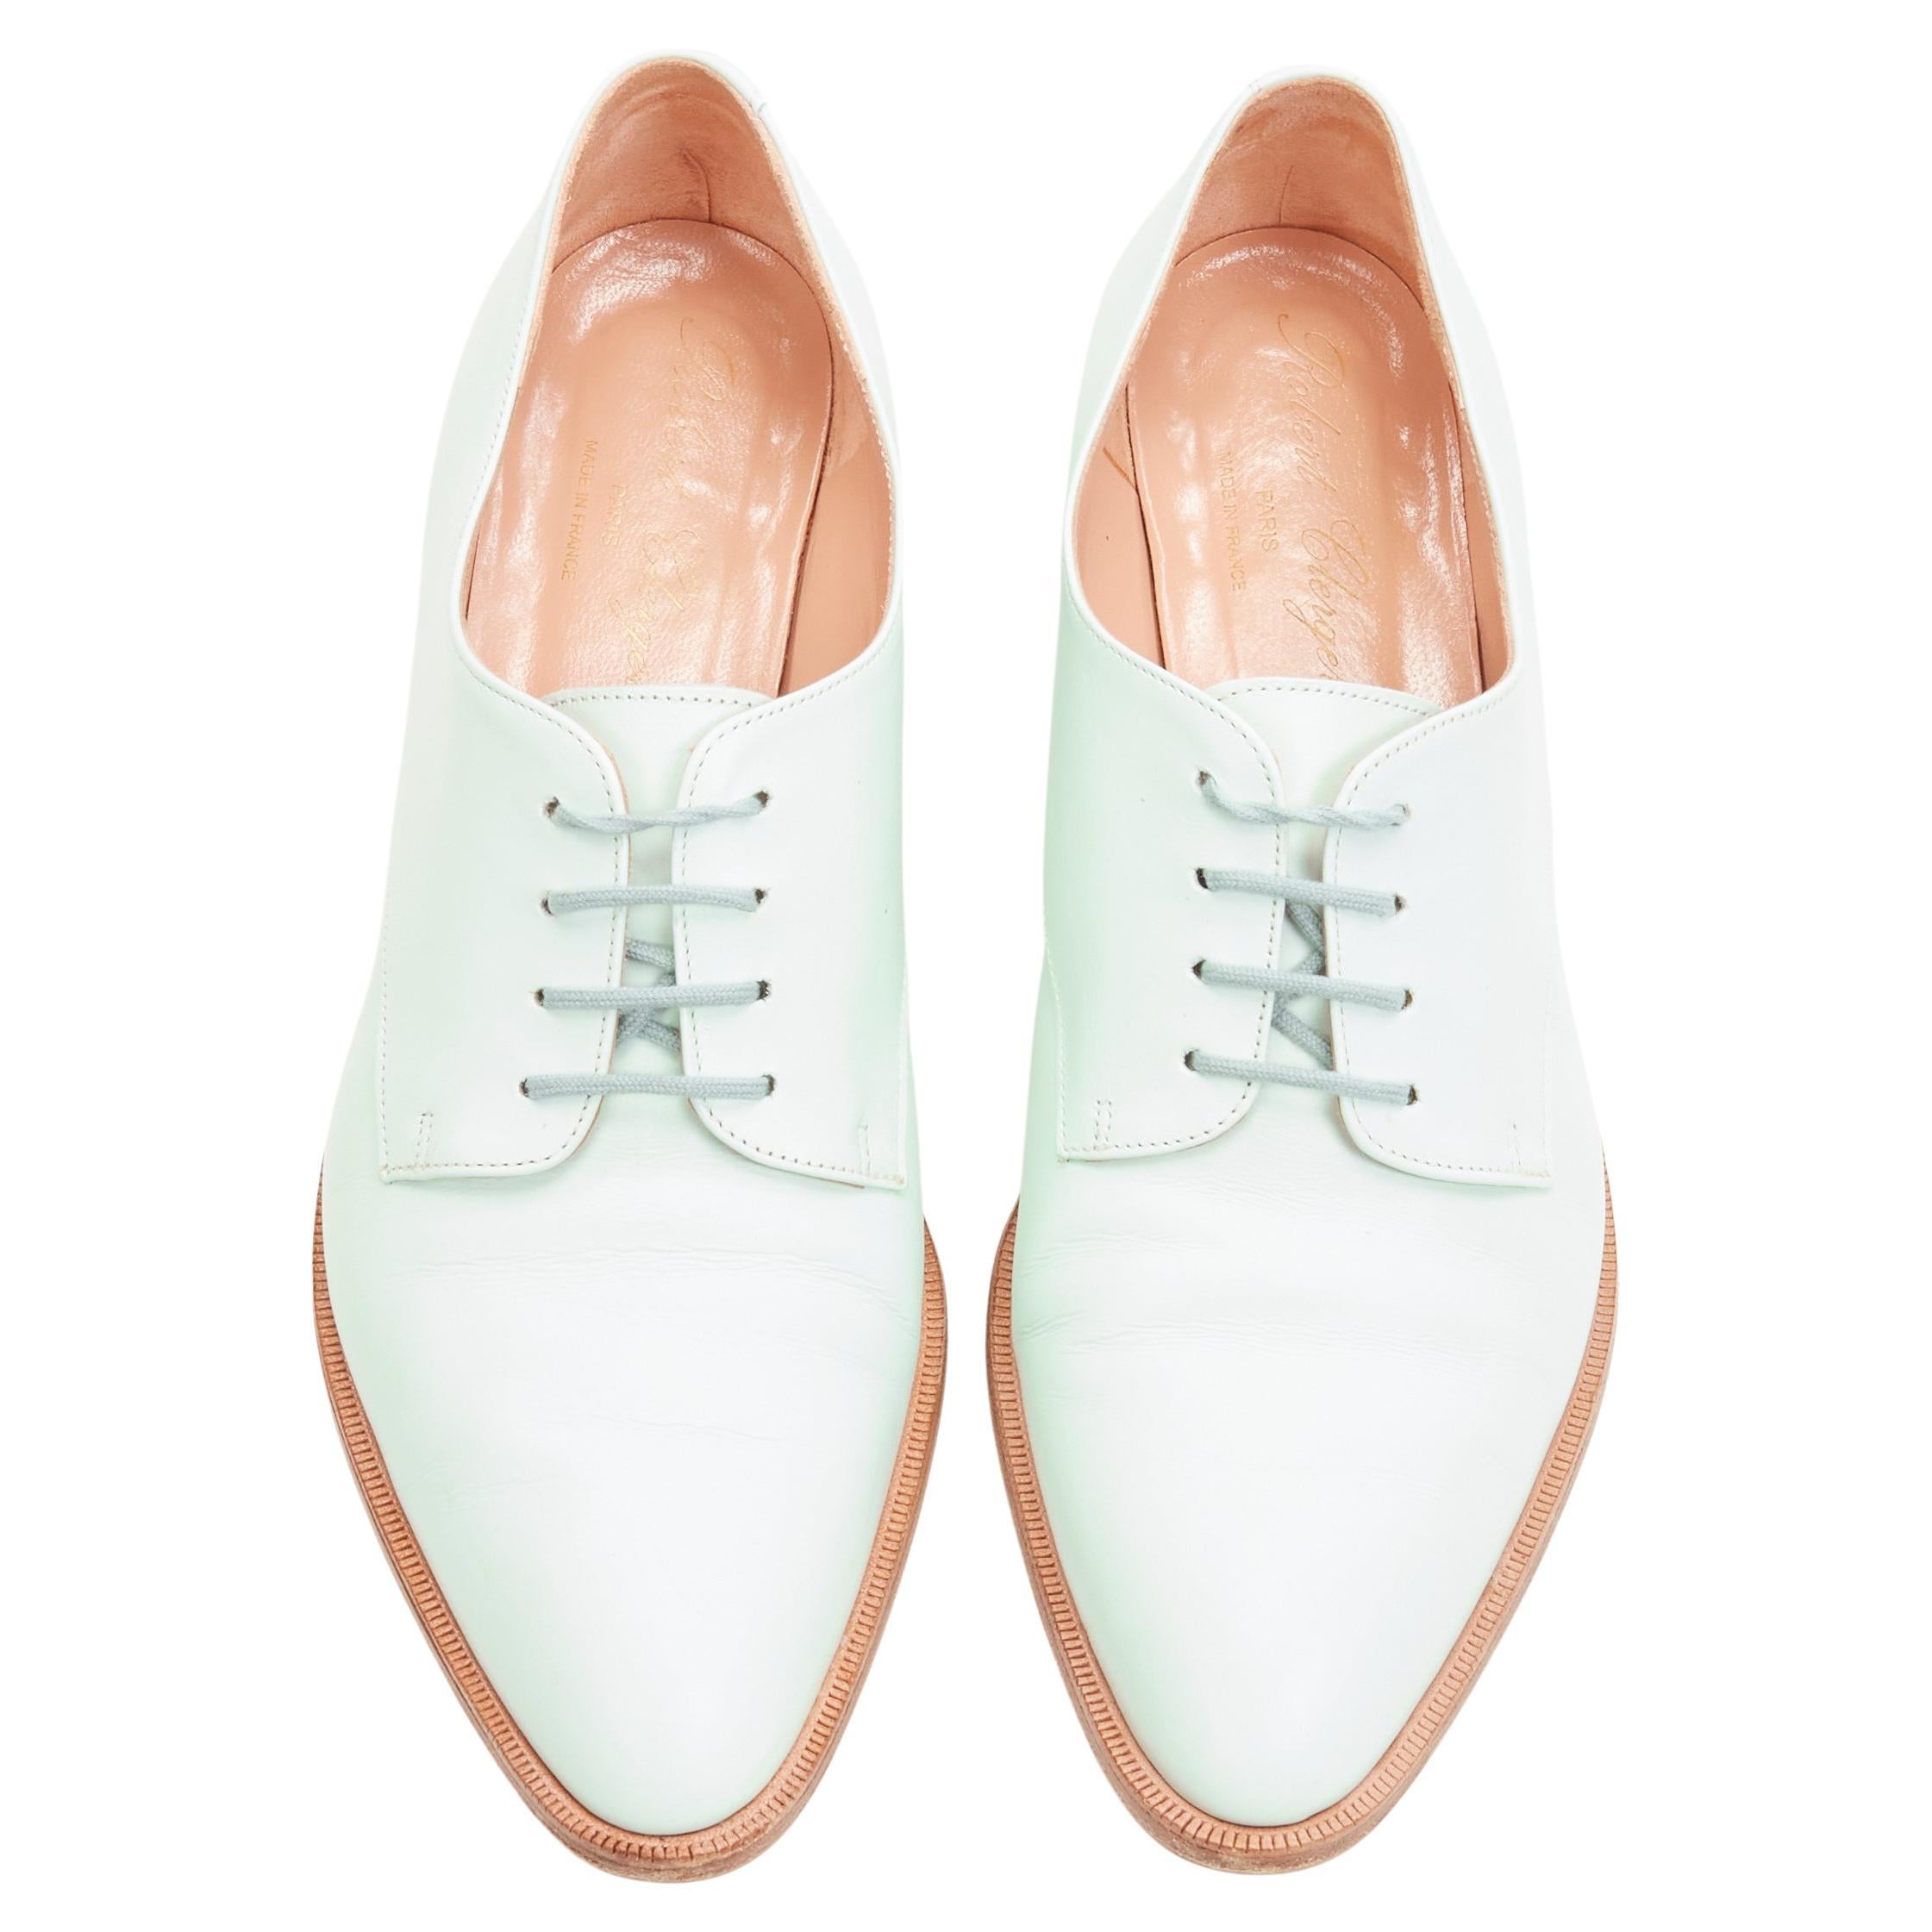 rare ROBERT CLERGERIE Xuz seafoam teal green wooden heel brogue loafer EU36.5
Brand: Robert Clergerie
Model: Xuz
Material: Leather
Color: Blue
Pattern: Solid
Closure: Lace Up
Extra Detail: Pointed almond toe. Stacked wooden